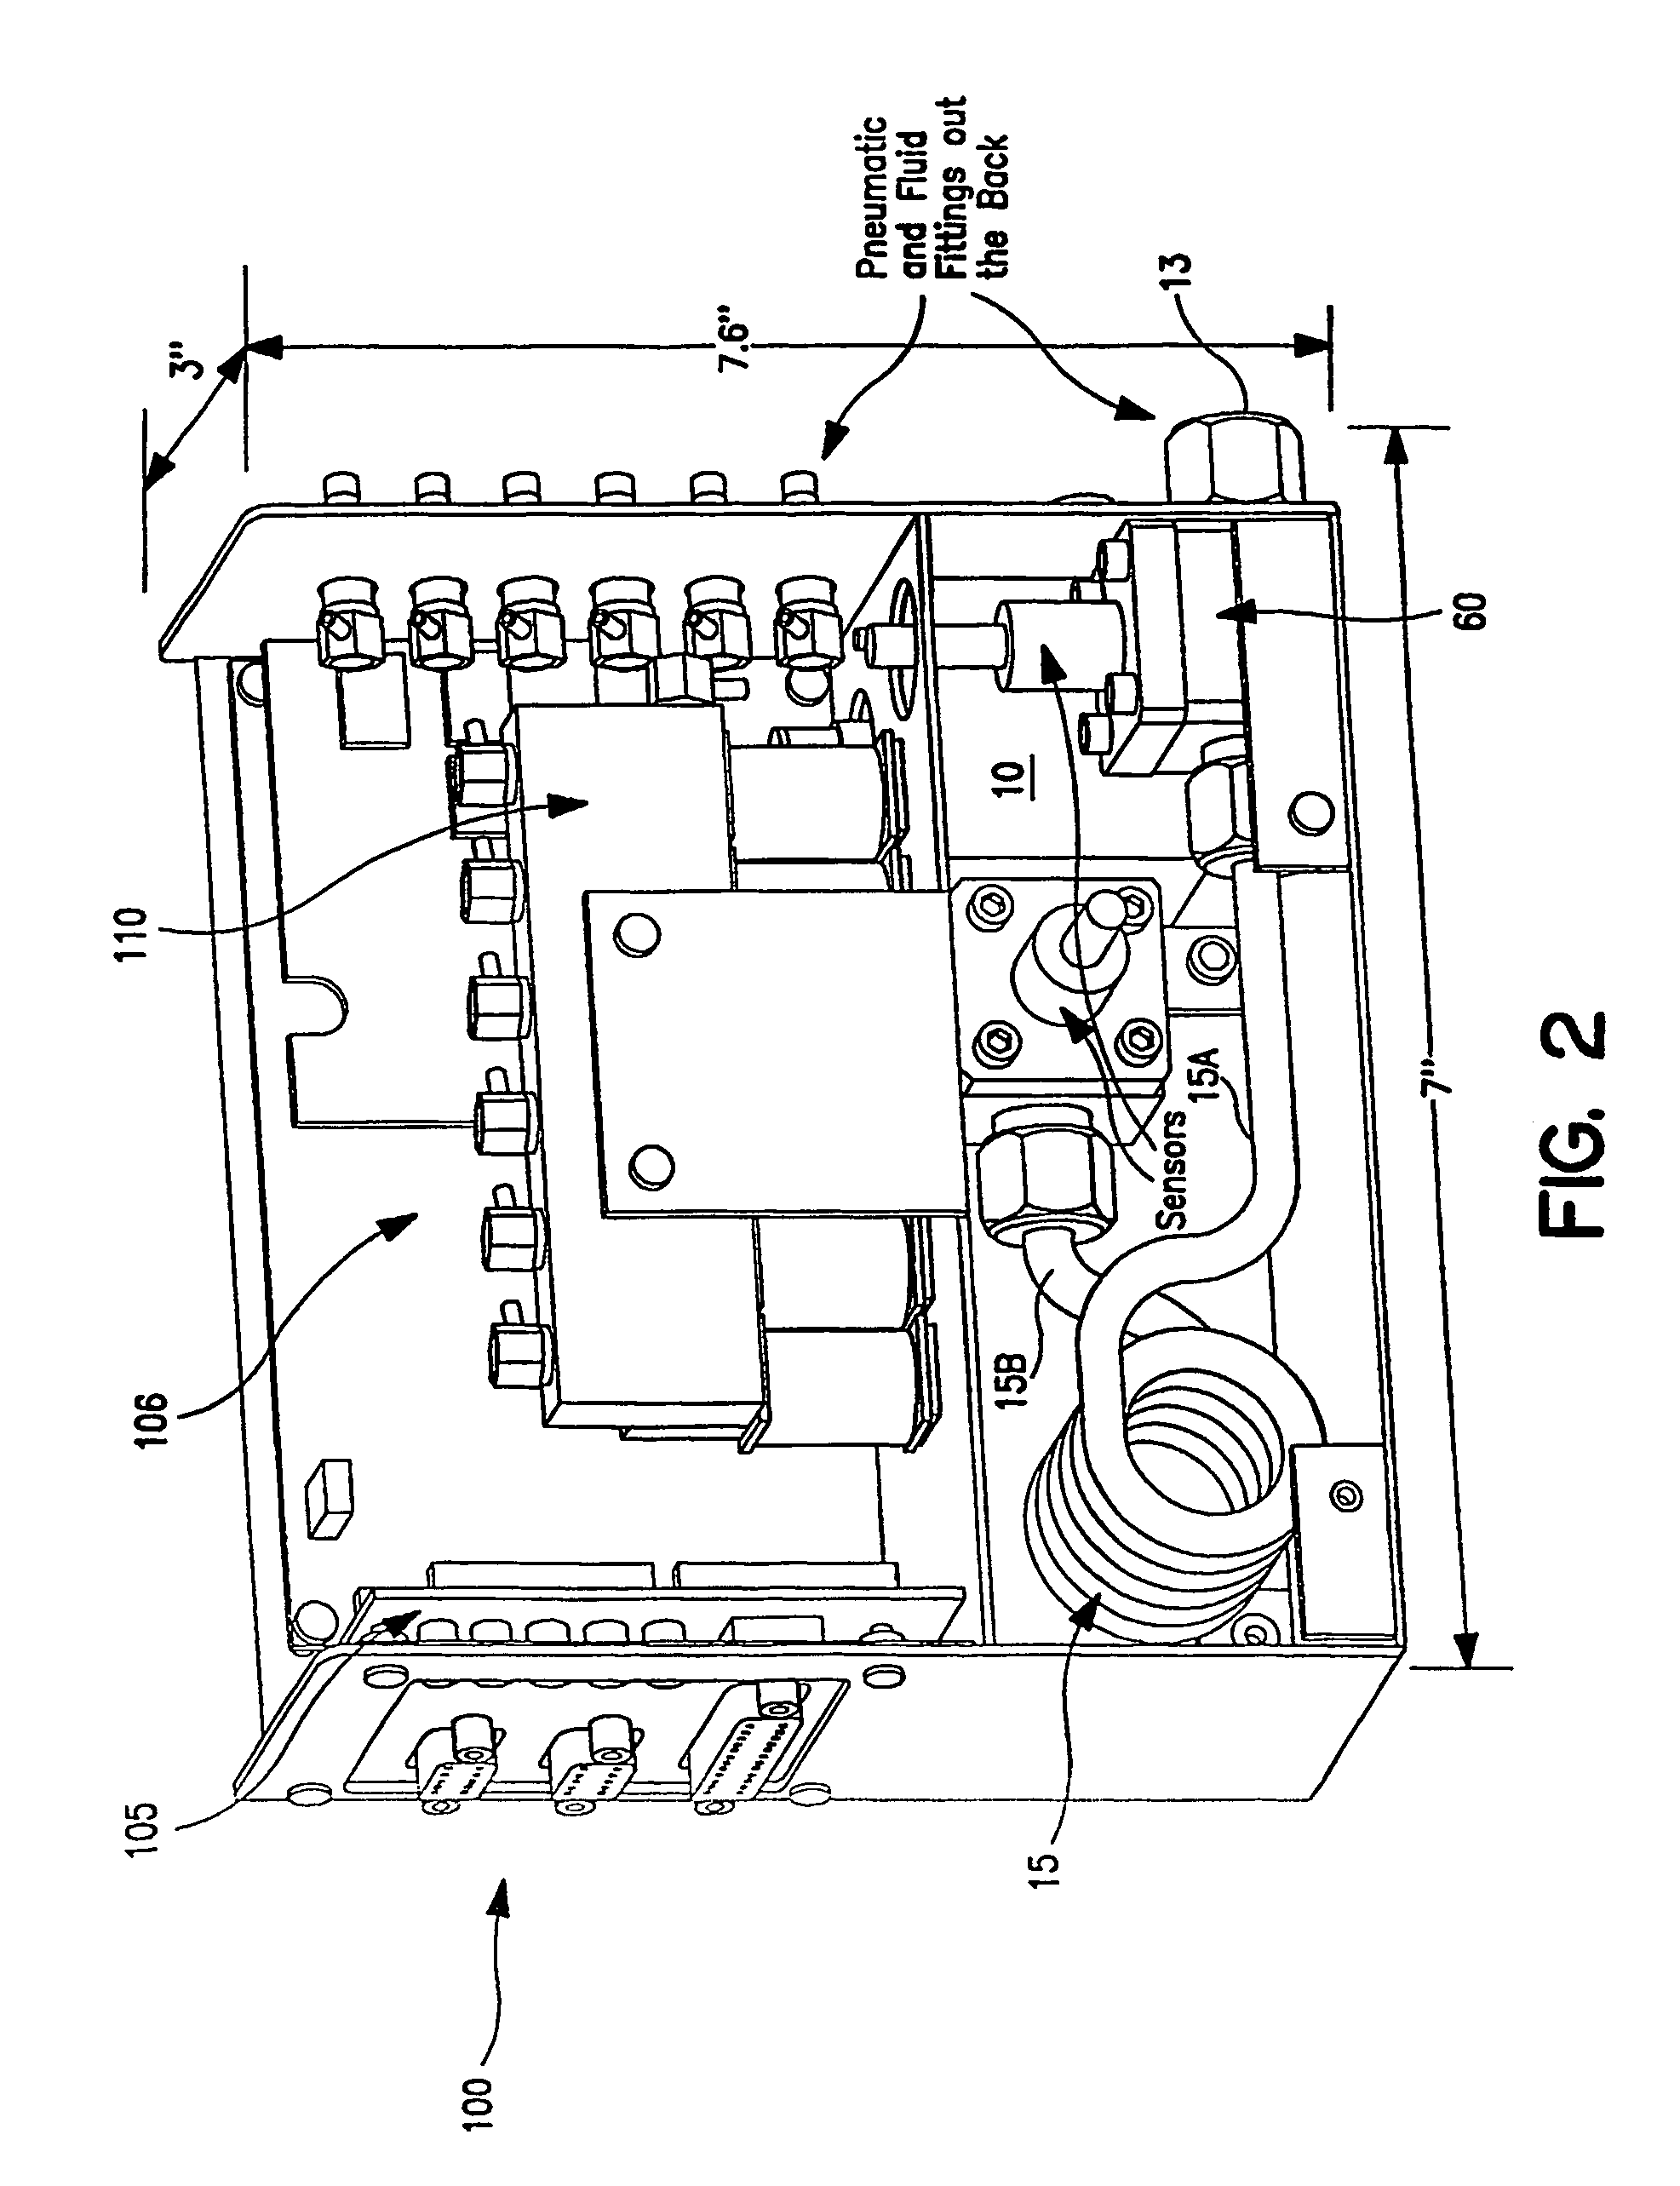 Liquid flow controller and precision dispense apparatus and system